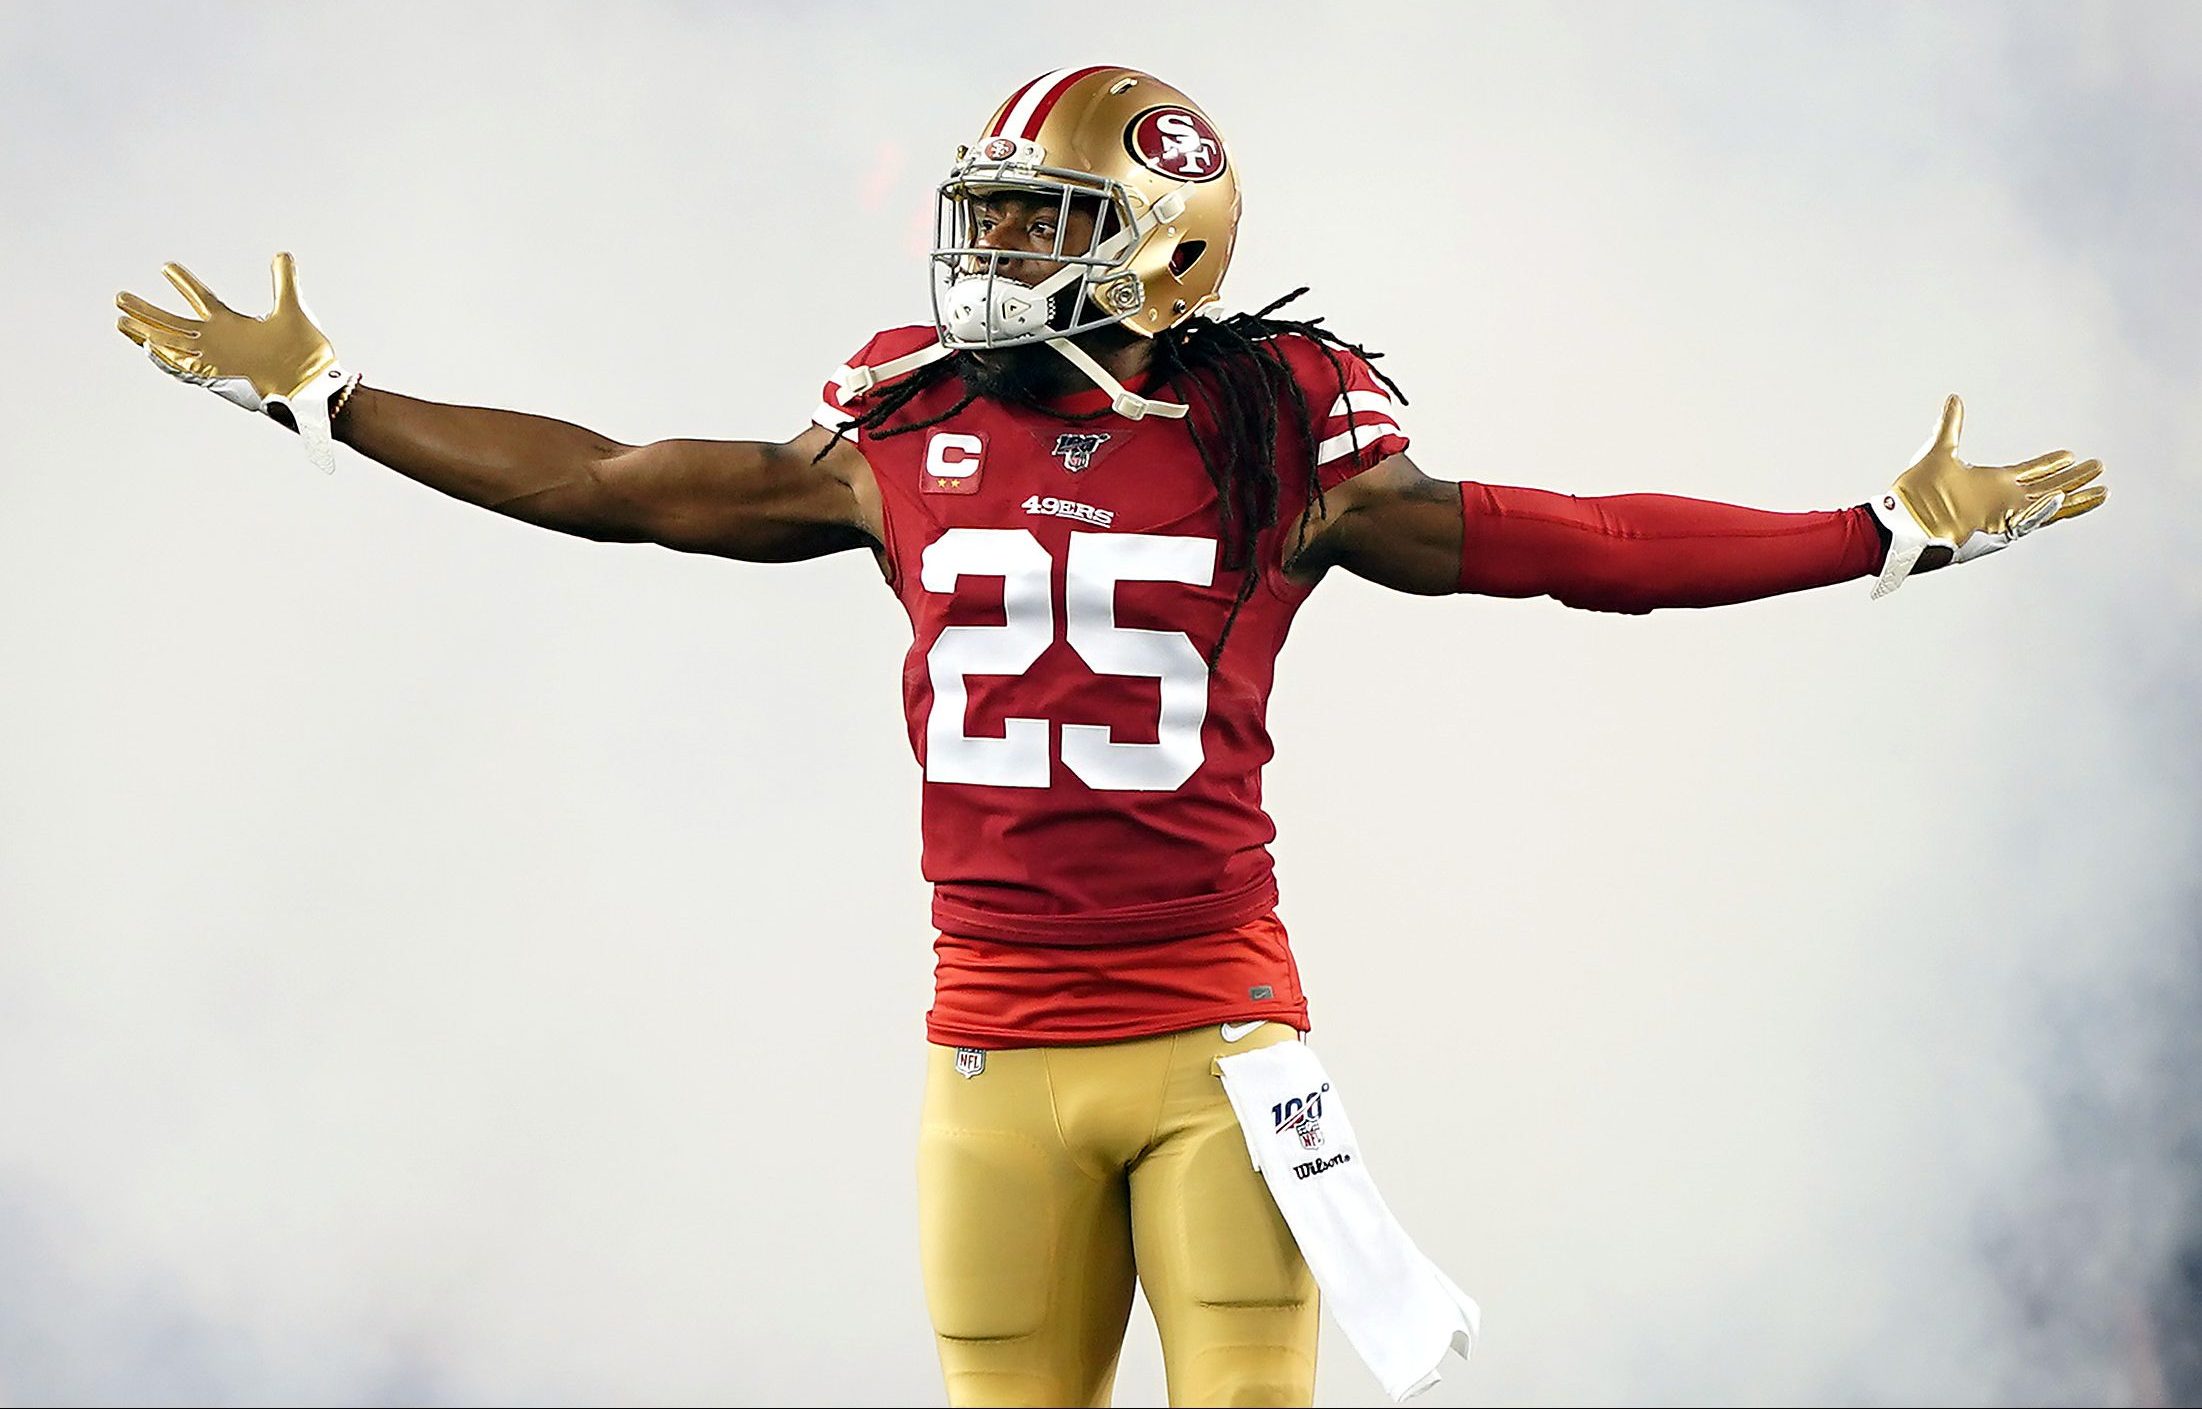 49ers gold and red jersey